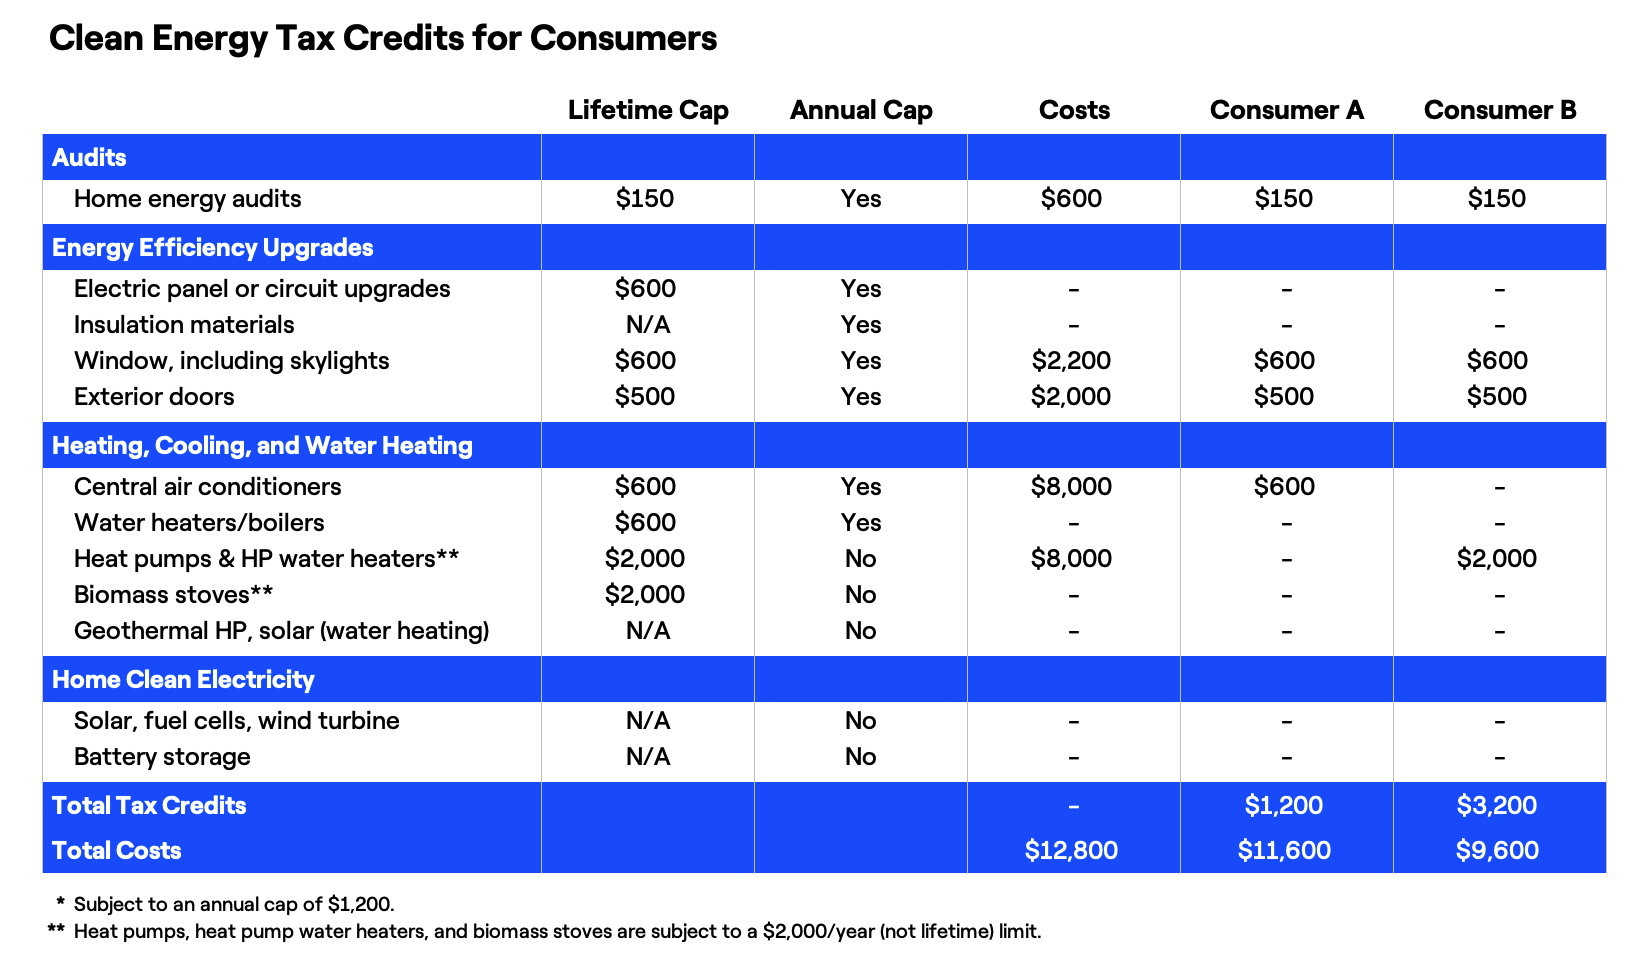 Table showing clean energy tax credits for consumers